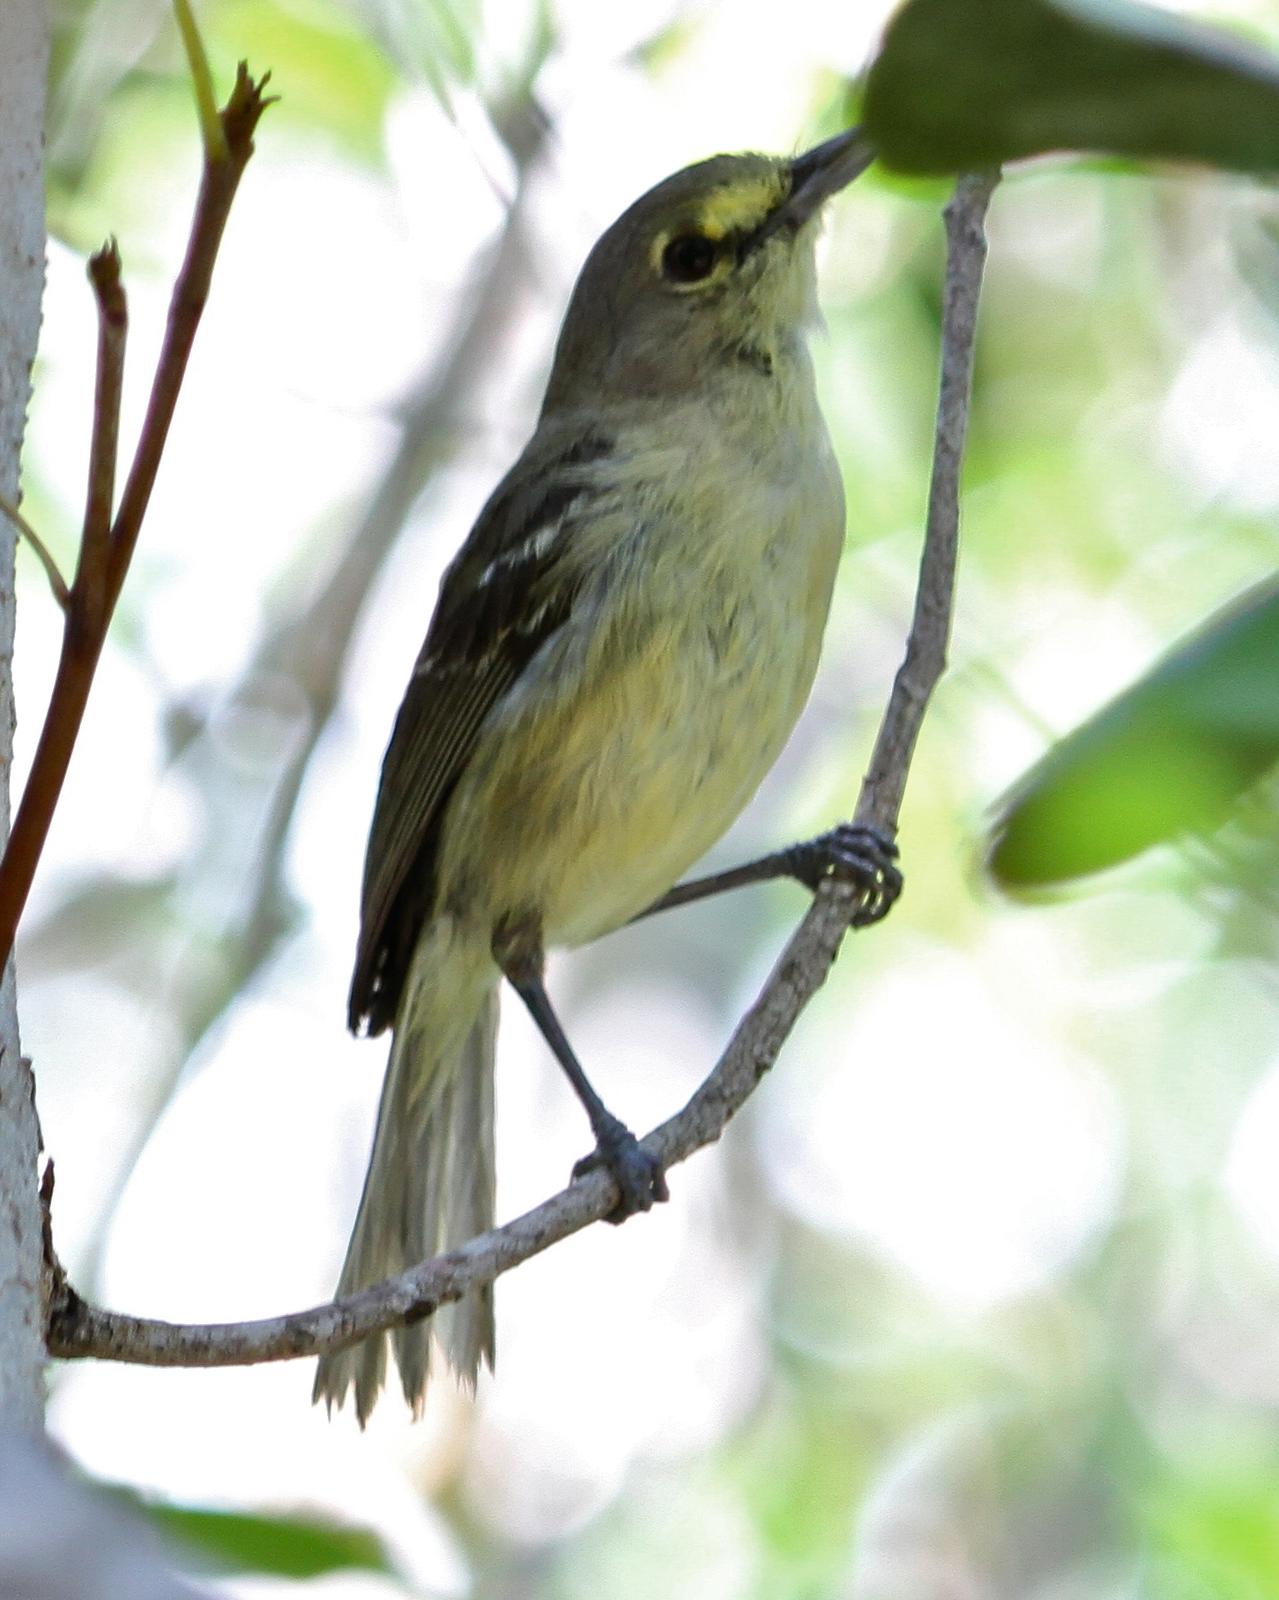 Thick-billed Vireo Photo by Monte Taylor